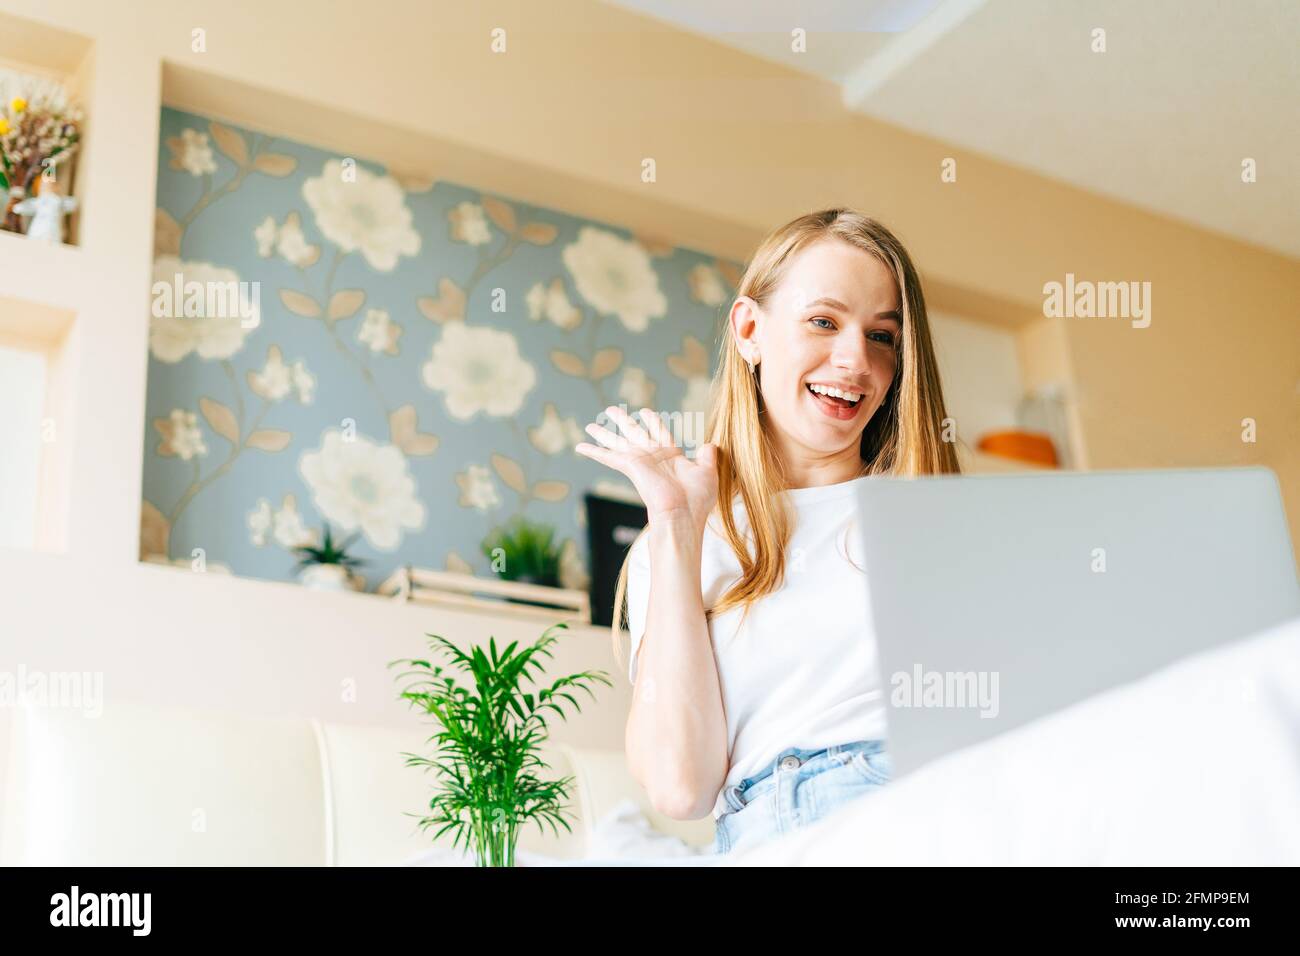 Blonde woman working at home with laptop Stock Photo